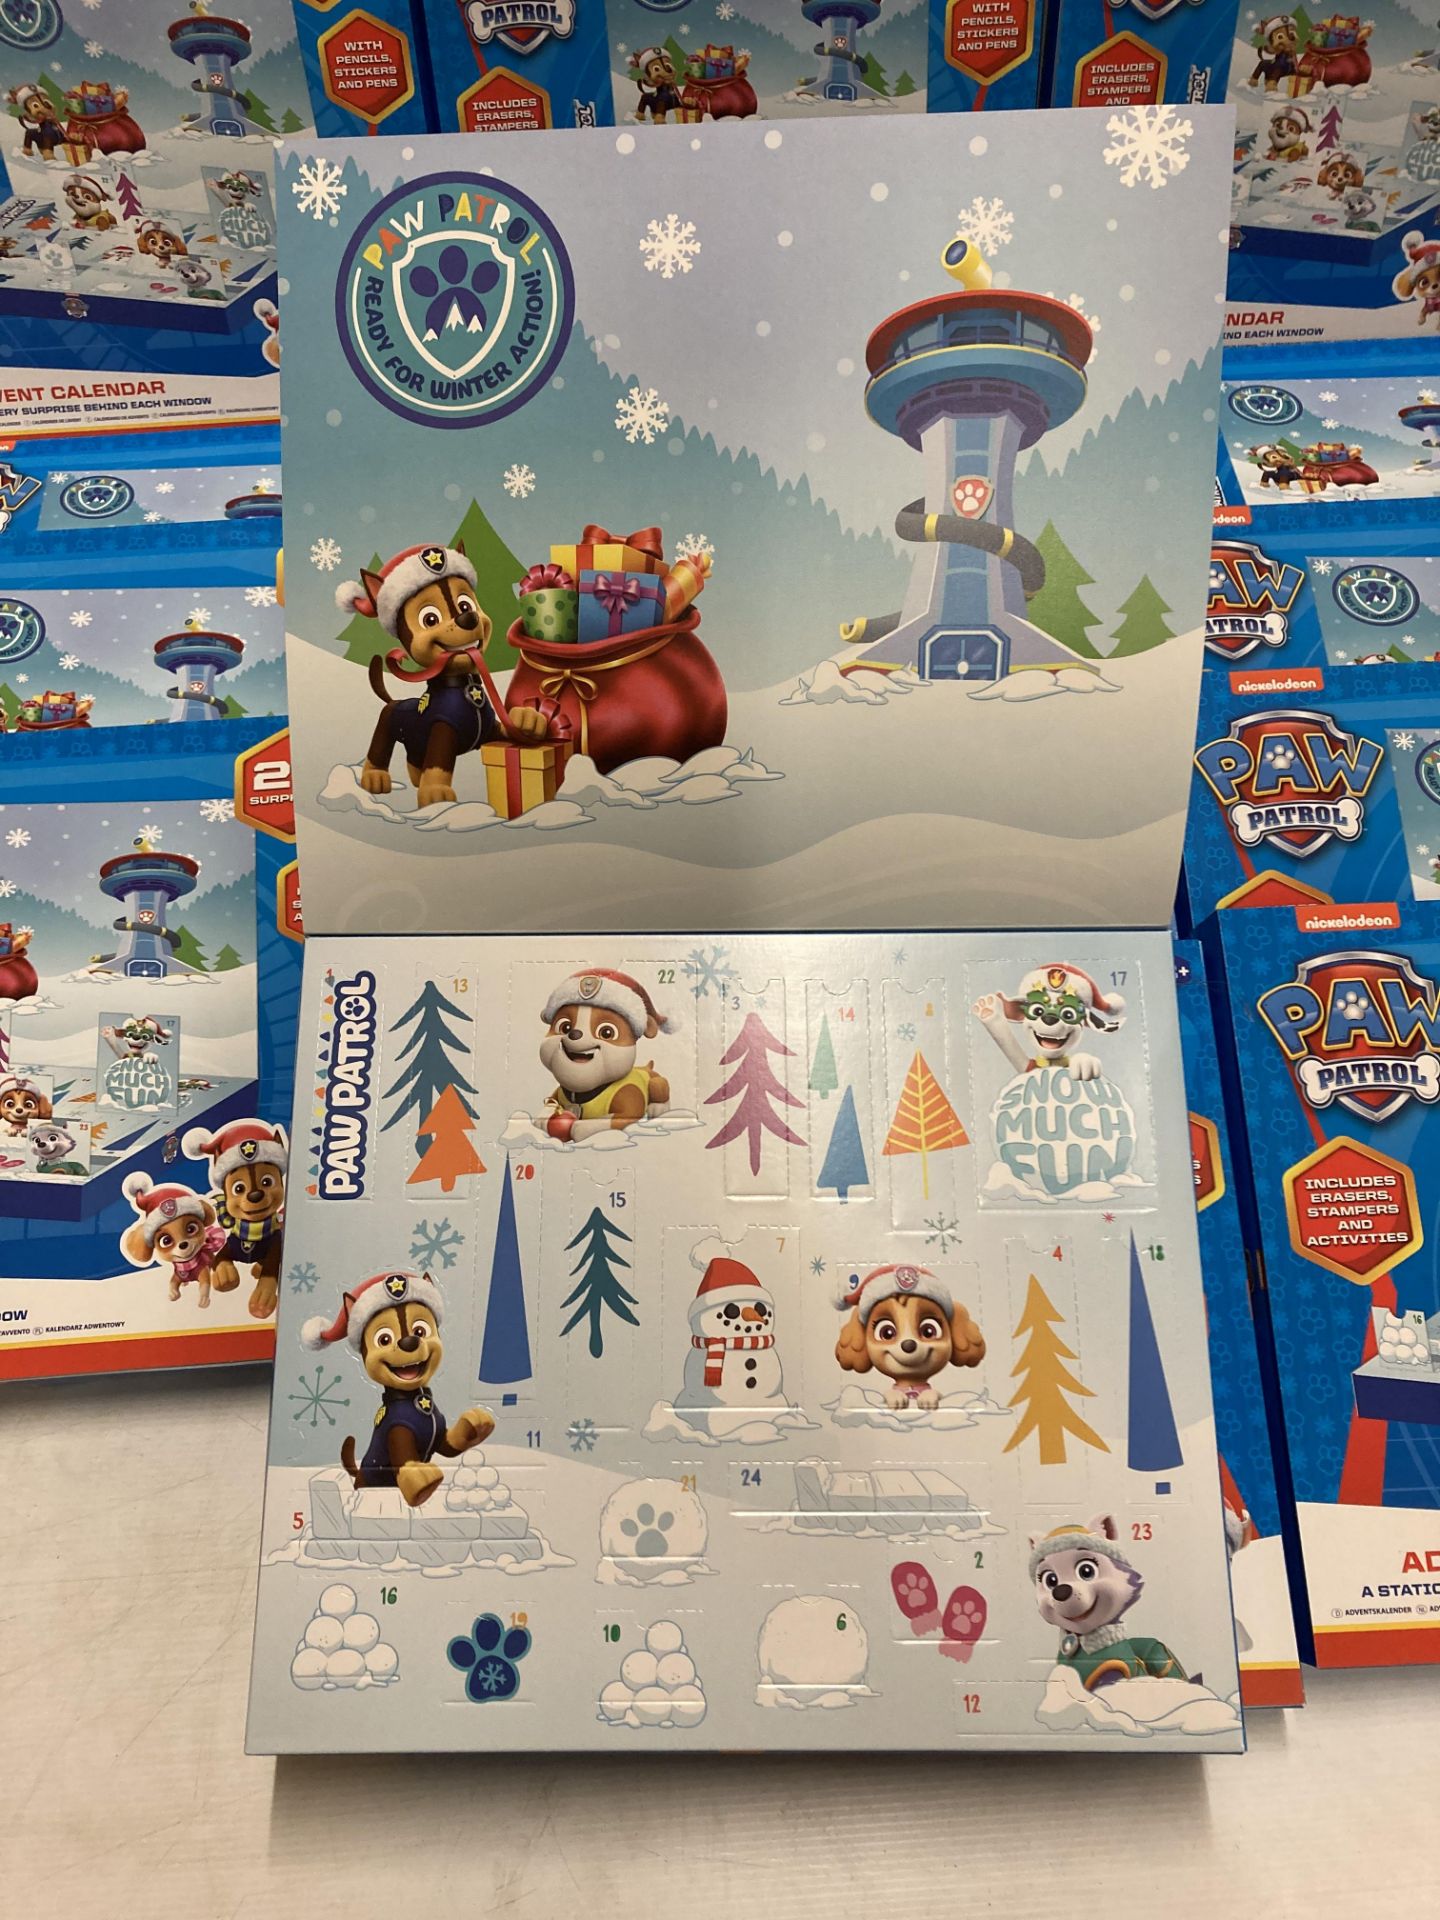 24 x Paw Patrol Advent Calendars with 24 x Surprise Stationery Gifts (saleroom location: Cage S/T) - Image 3 of 3